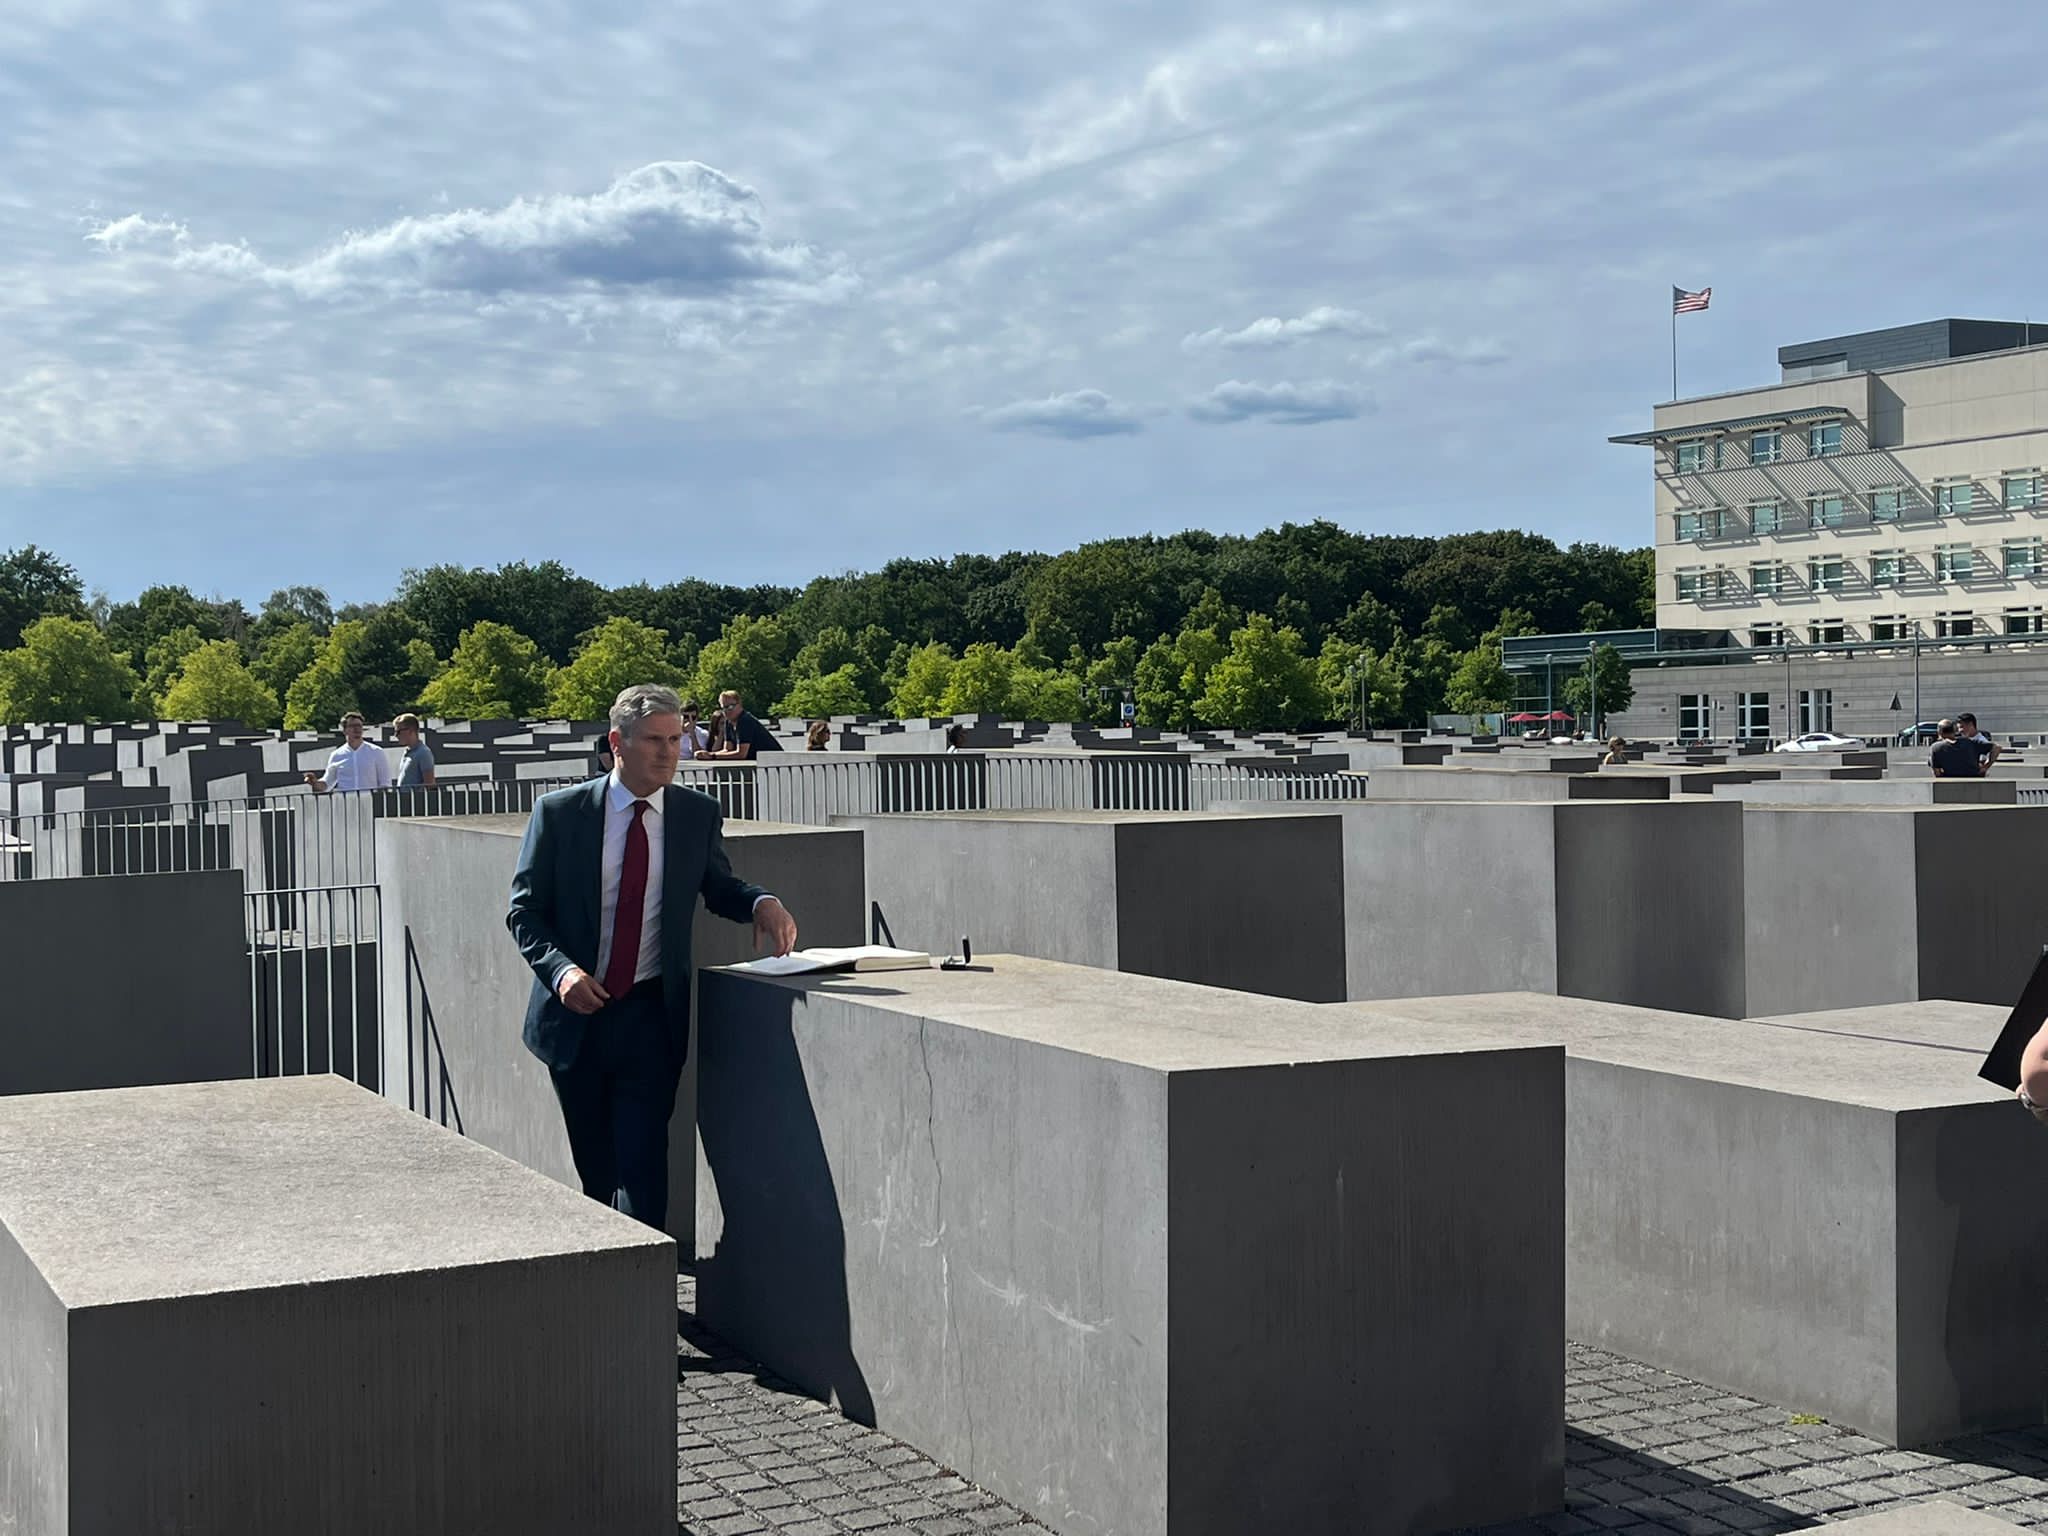 British State Visit – Labour Party Leader Visits Holocaust Memorial